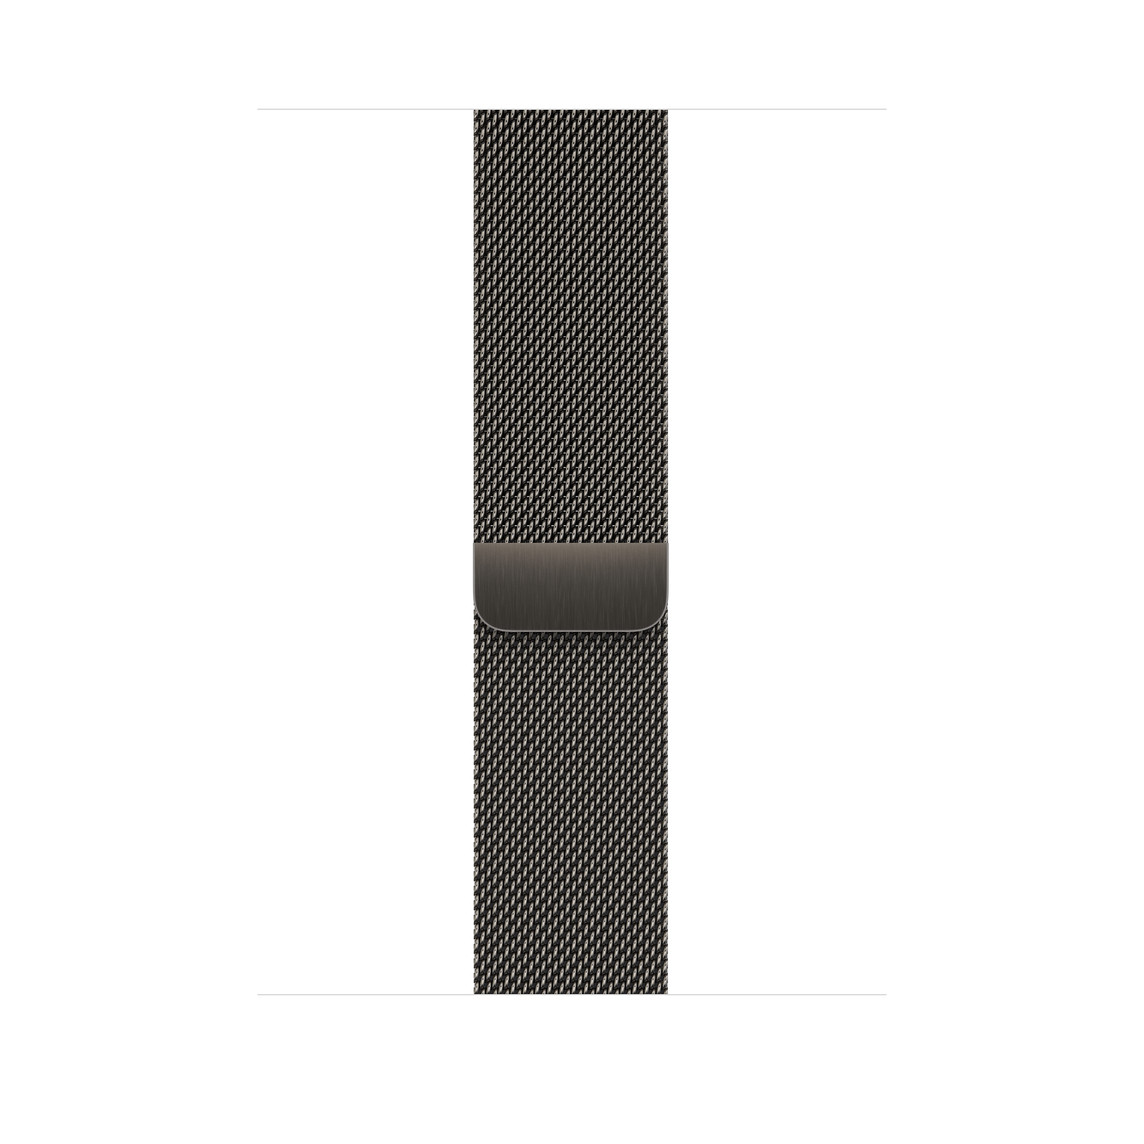 Graphite (dark gray) Milanese Loop band, polished stainless steel mesh with magnetic closure